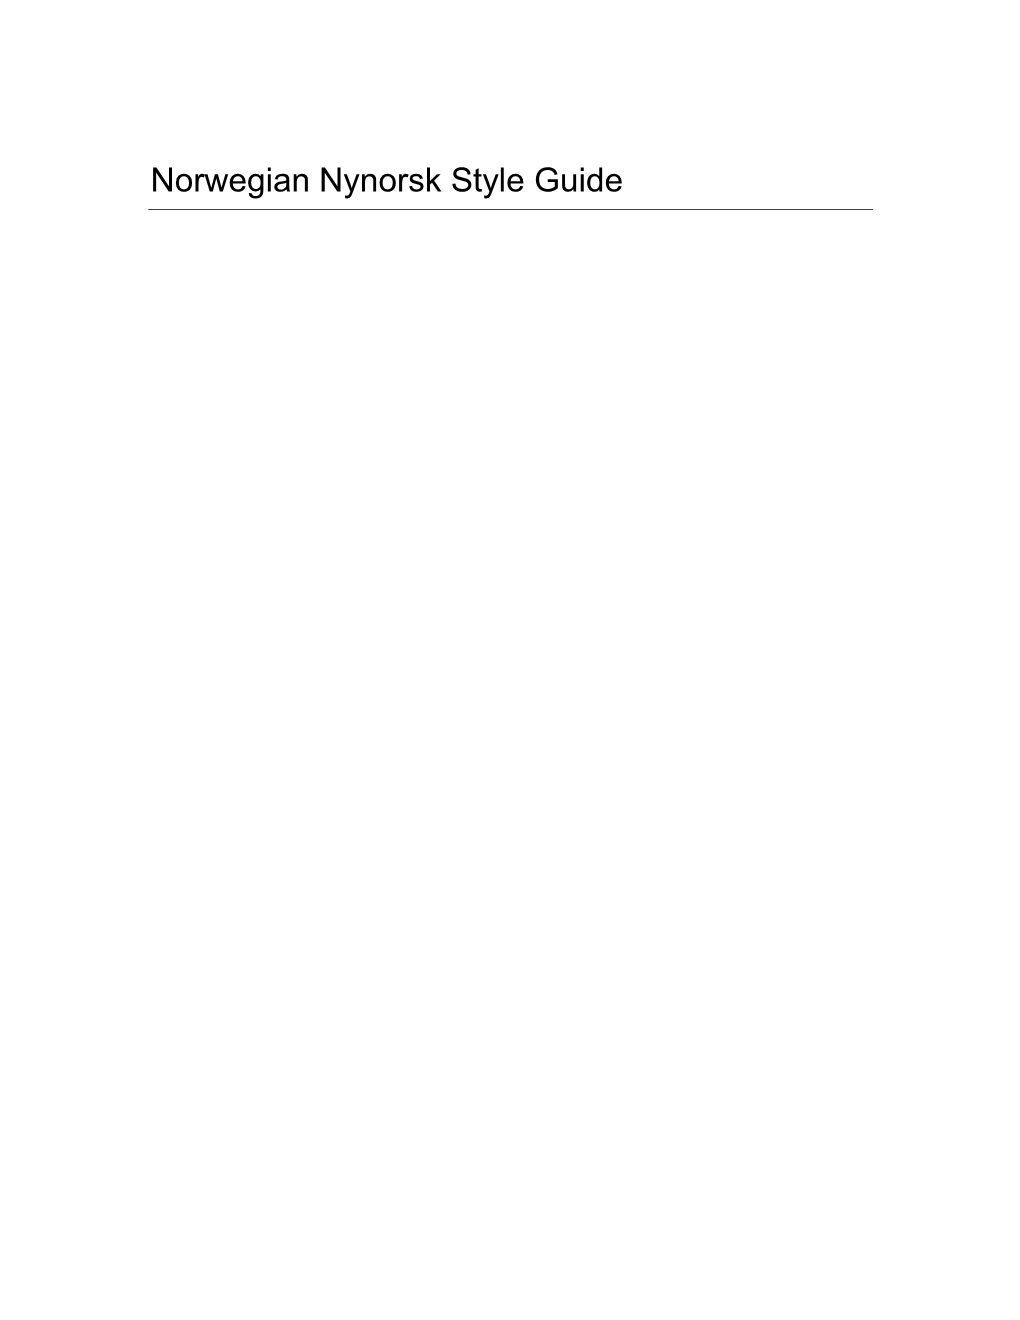 Norwegian Nynorsk Style Guide